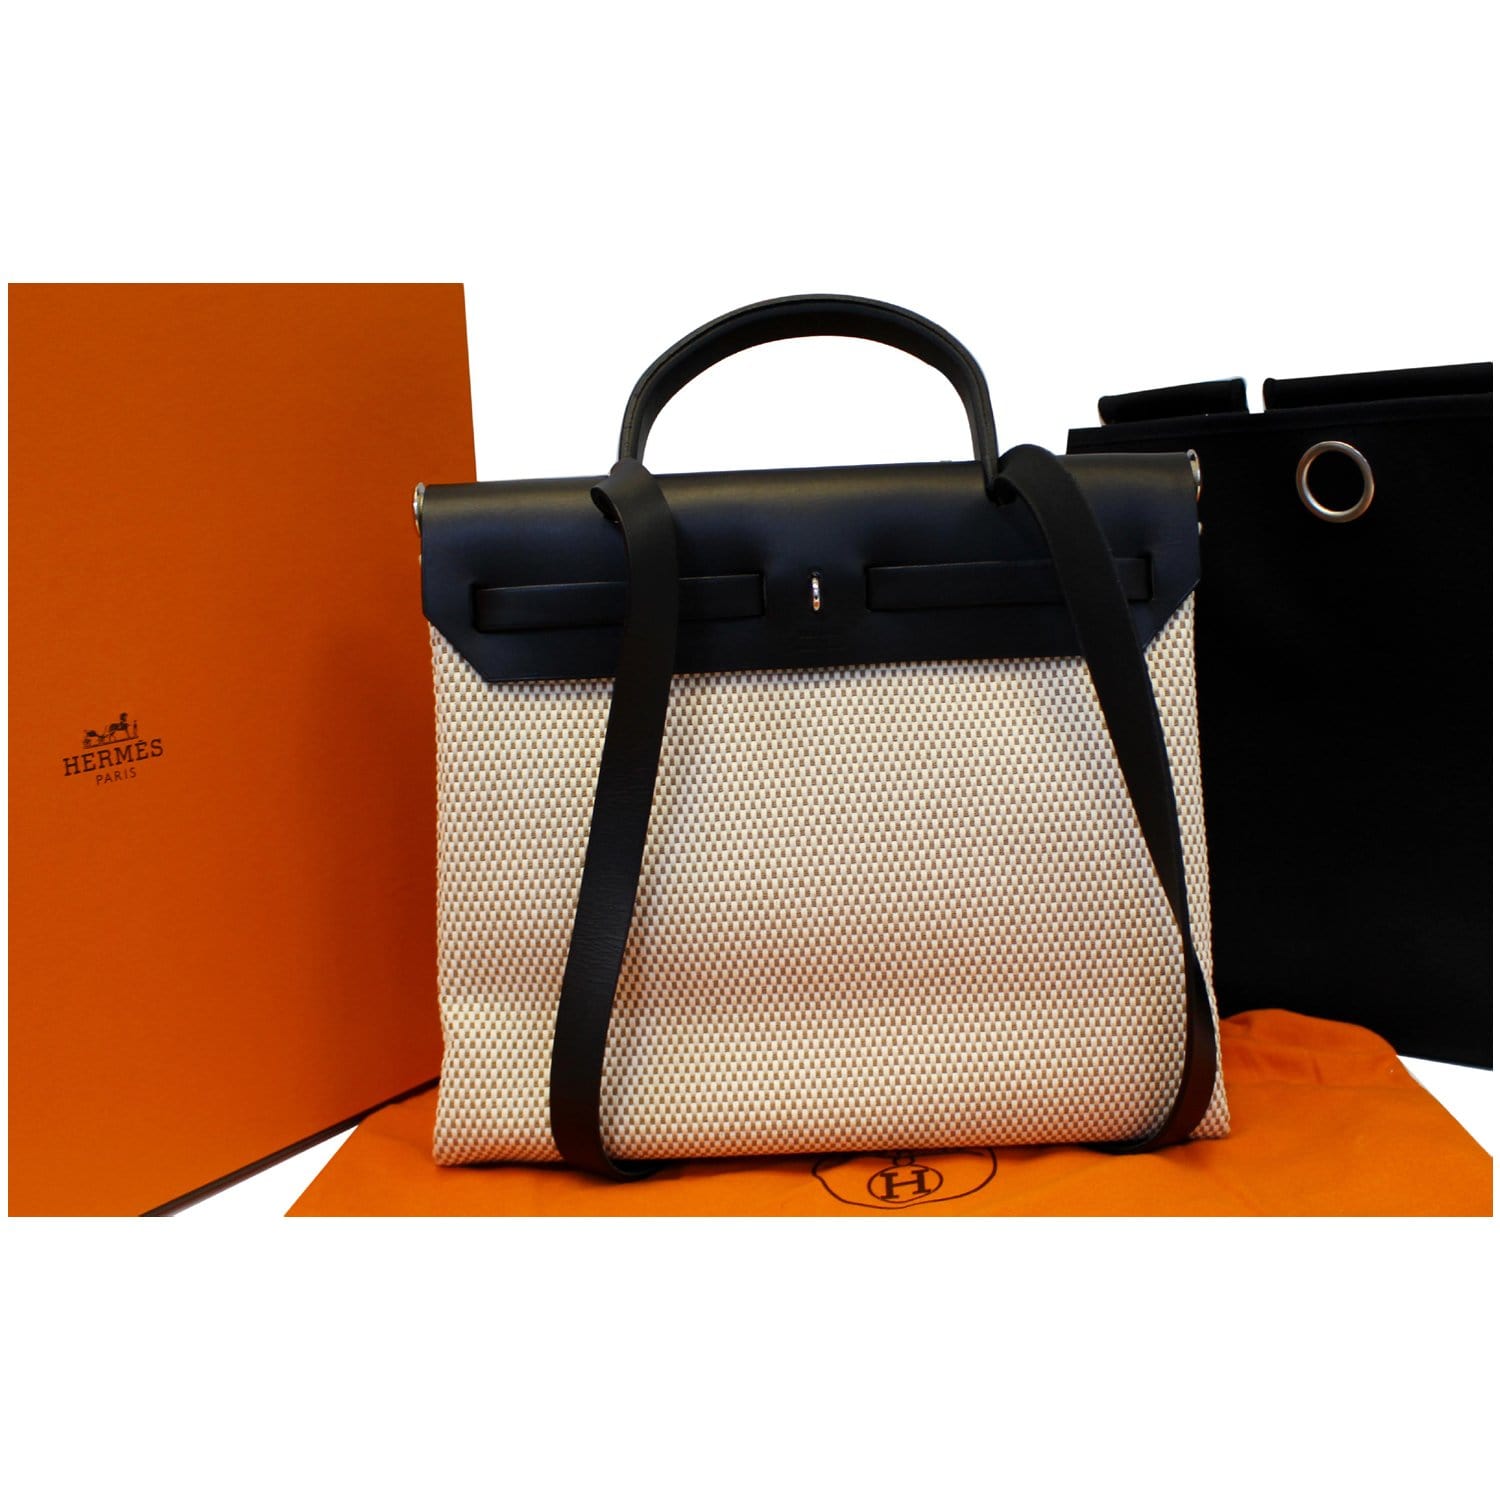 Hermes 30cm Natural Toile and Vache Calfskin Leather Herbag PM